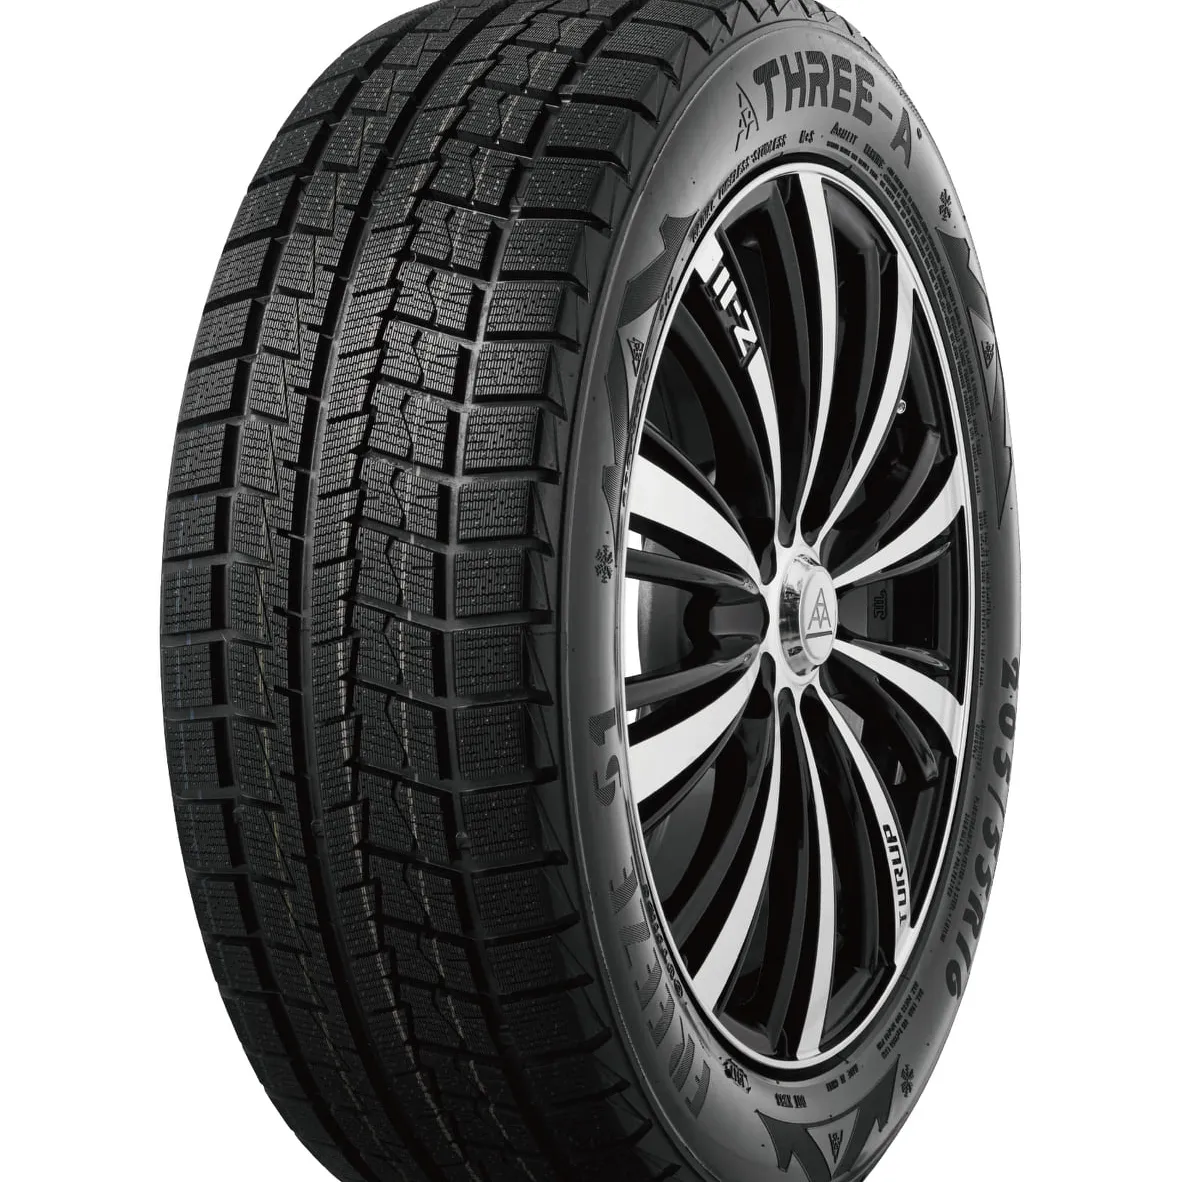 westlake car tires 15570r13 215 50 13 lastik 1757013 190 55 17 gomme auto 225 45 17 r15 r17 three-a tyres with cheap price